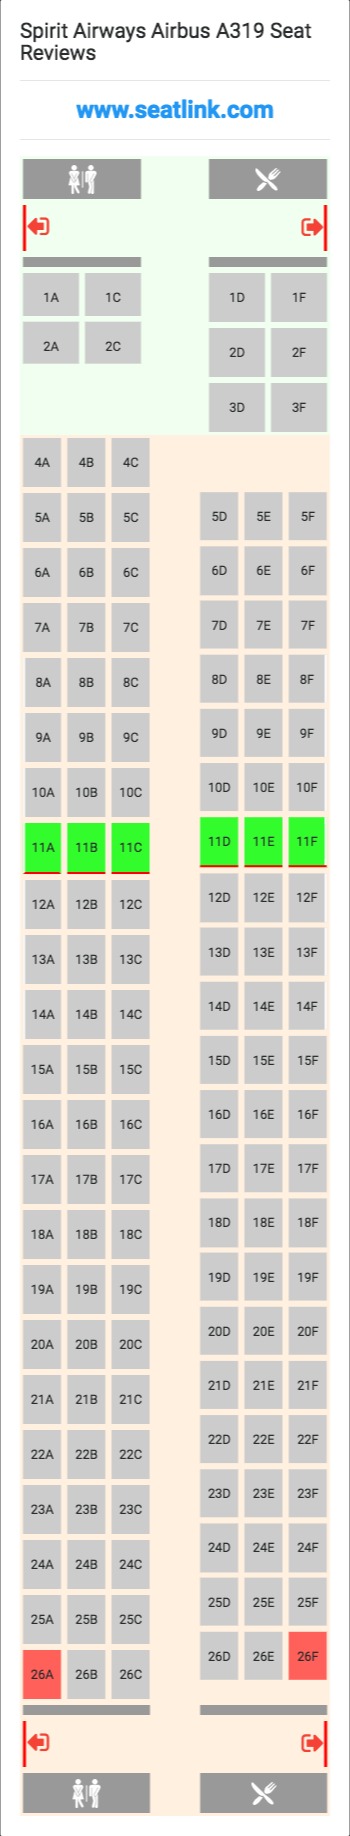 Spirit Airways Airbus A319 Seating Chart - Updated January 2020 - SeatLink